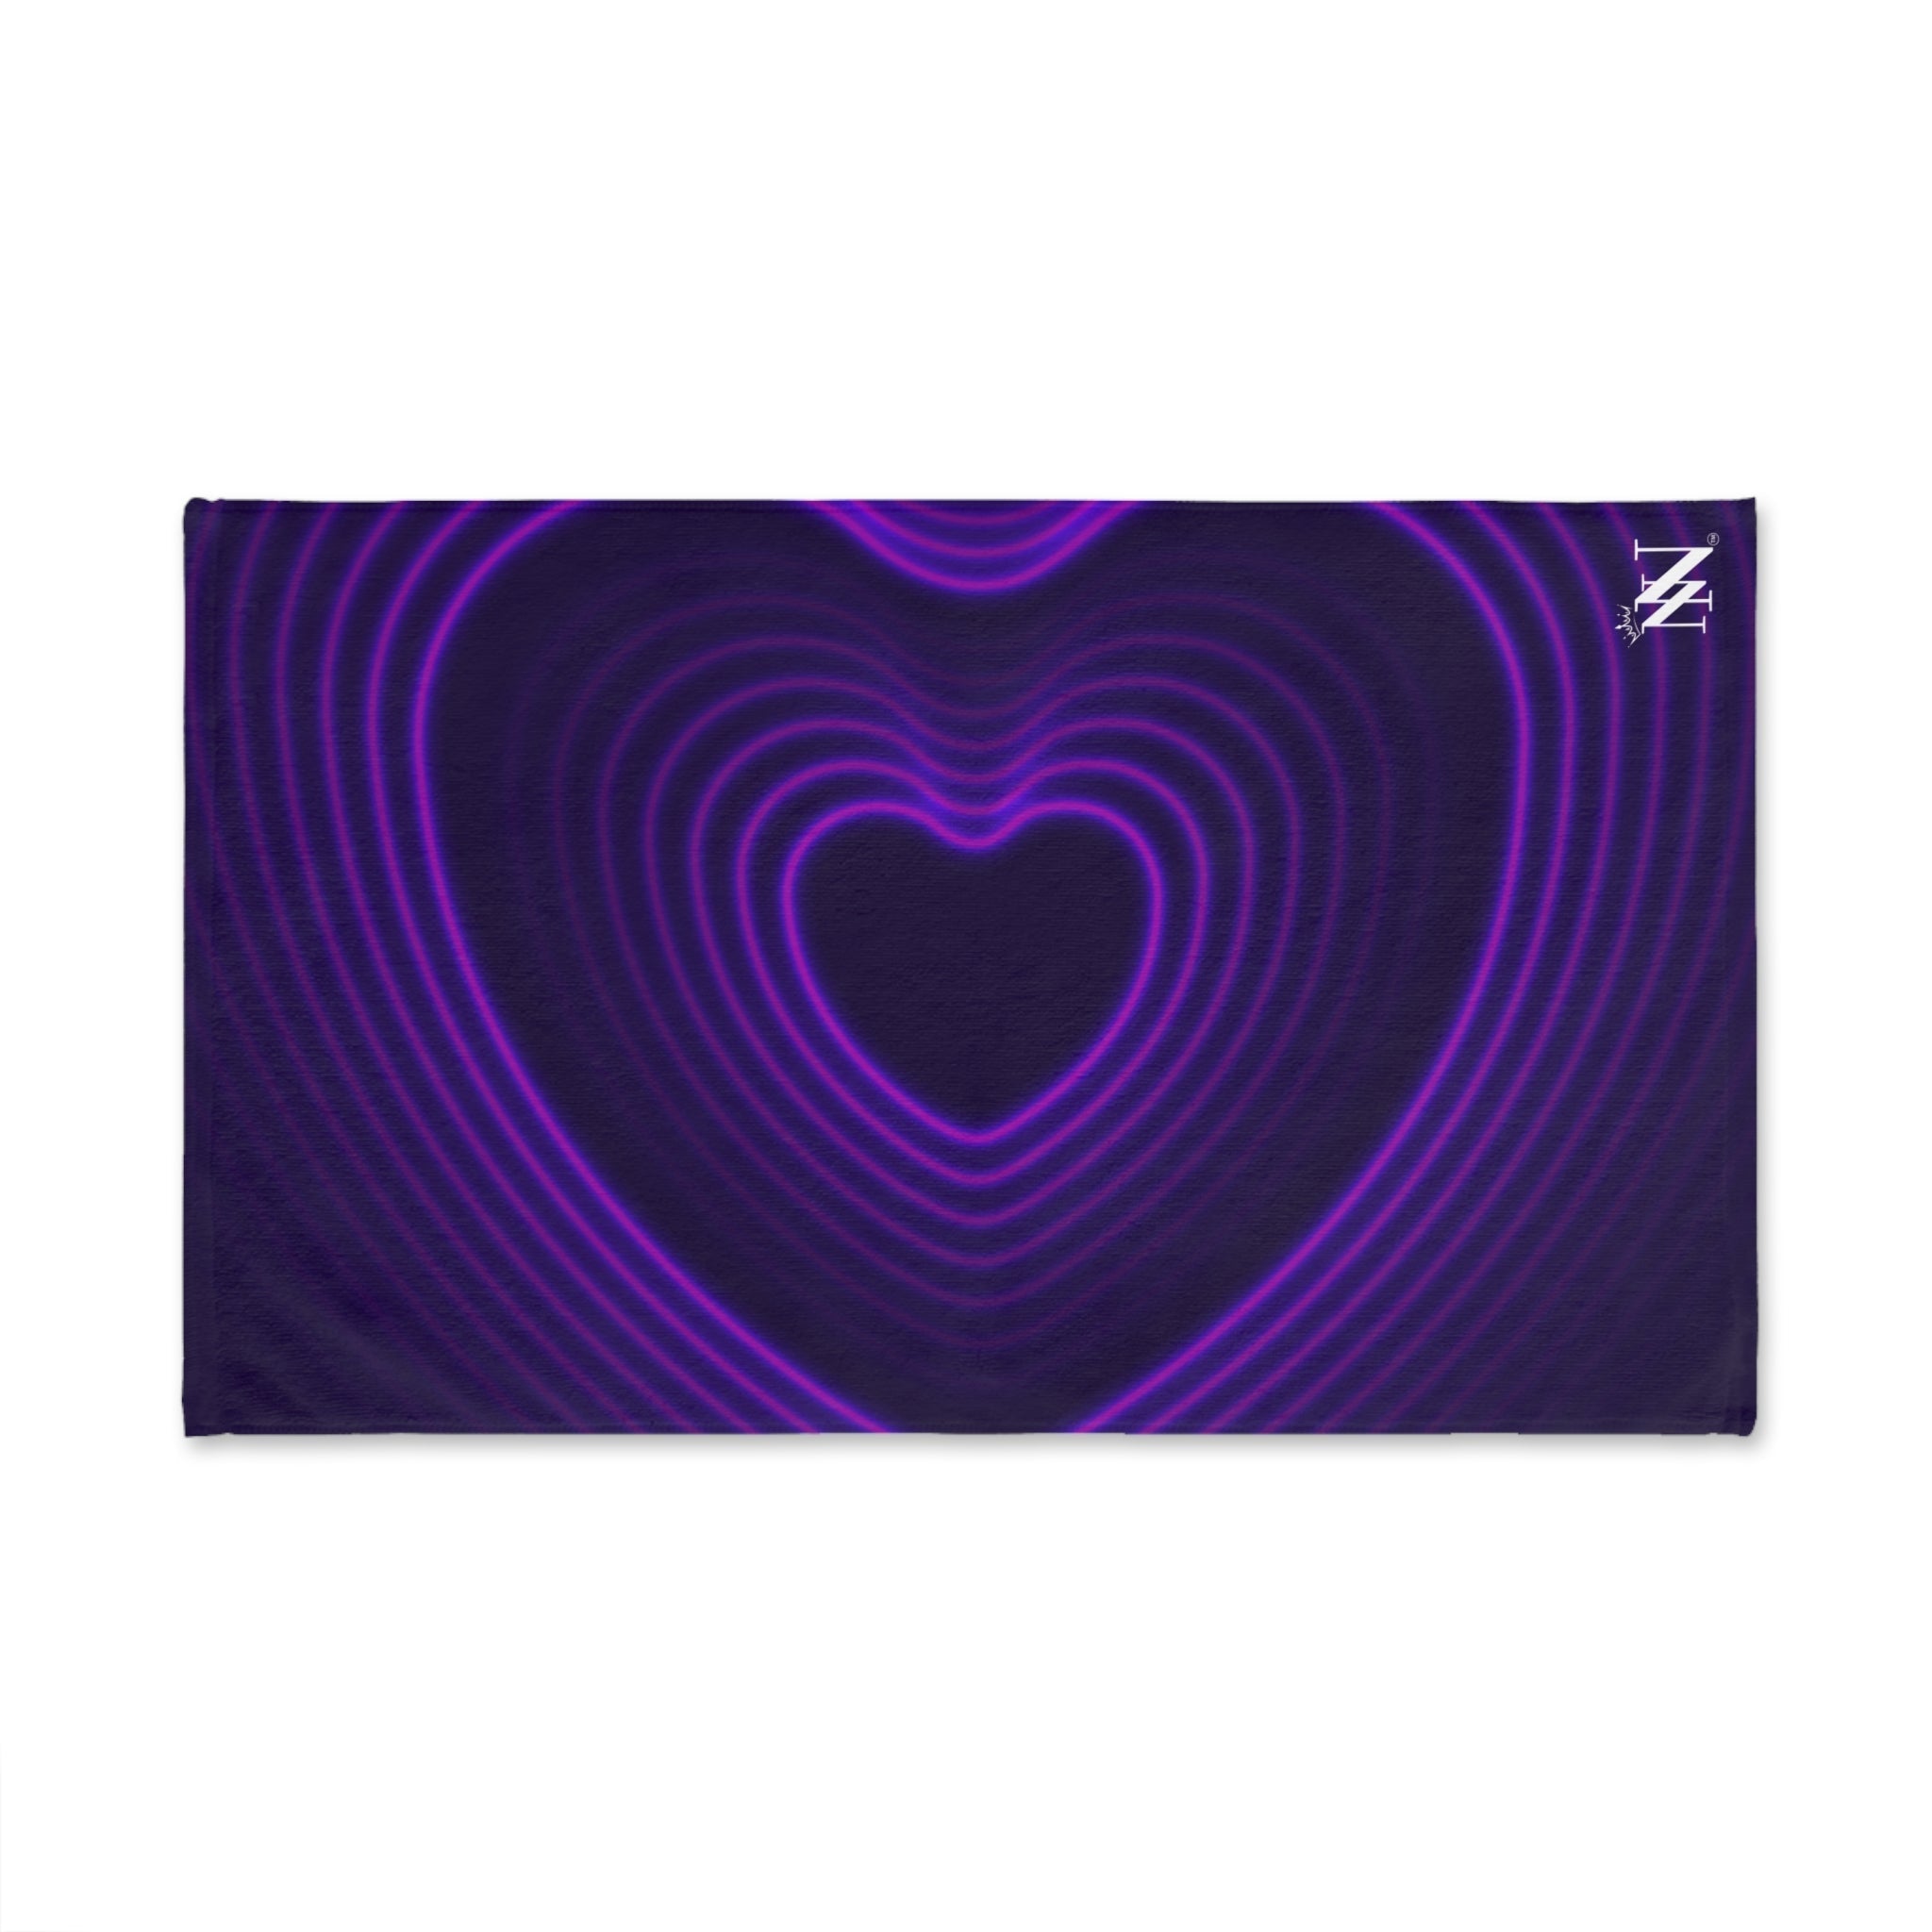 Lined Heart Purple White | Funny Gifts for Men - Gifts for Him - Birthday Gifts for Men, Him, Her, Husband, Boyfriend, Girlfriend, New Couple Gifts, Fathers & Valentines Day Gifts, Christmas Gifts NECTAR NAPKINS